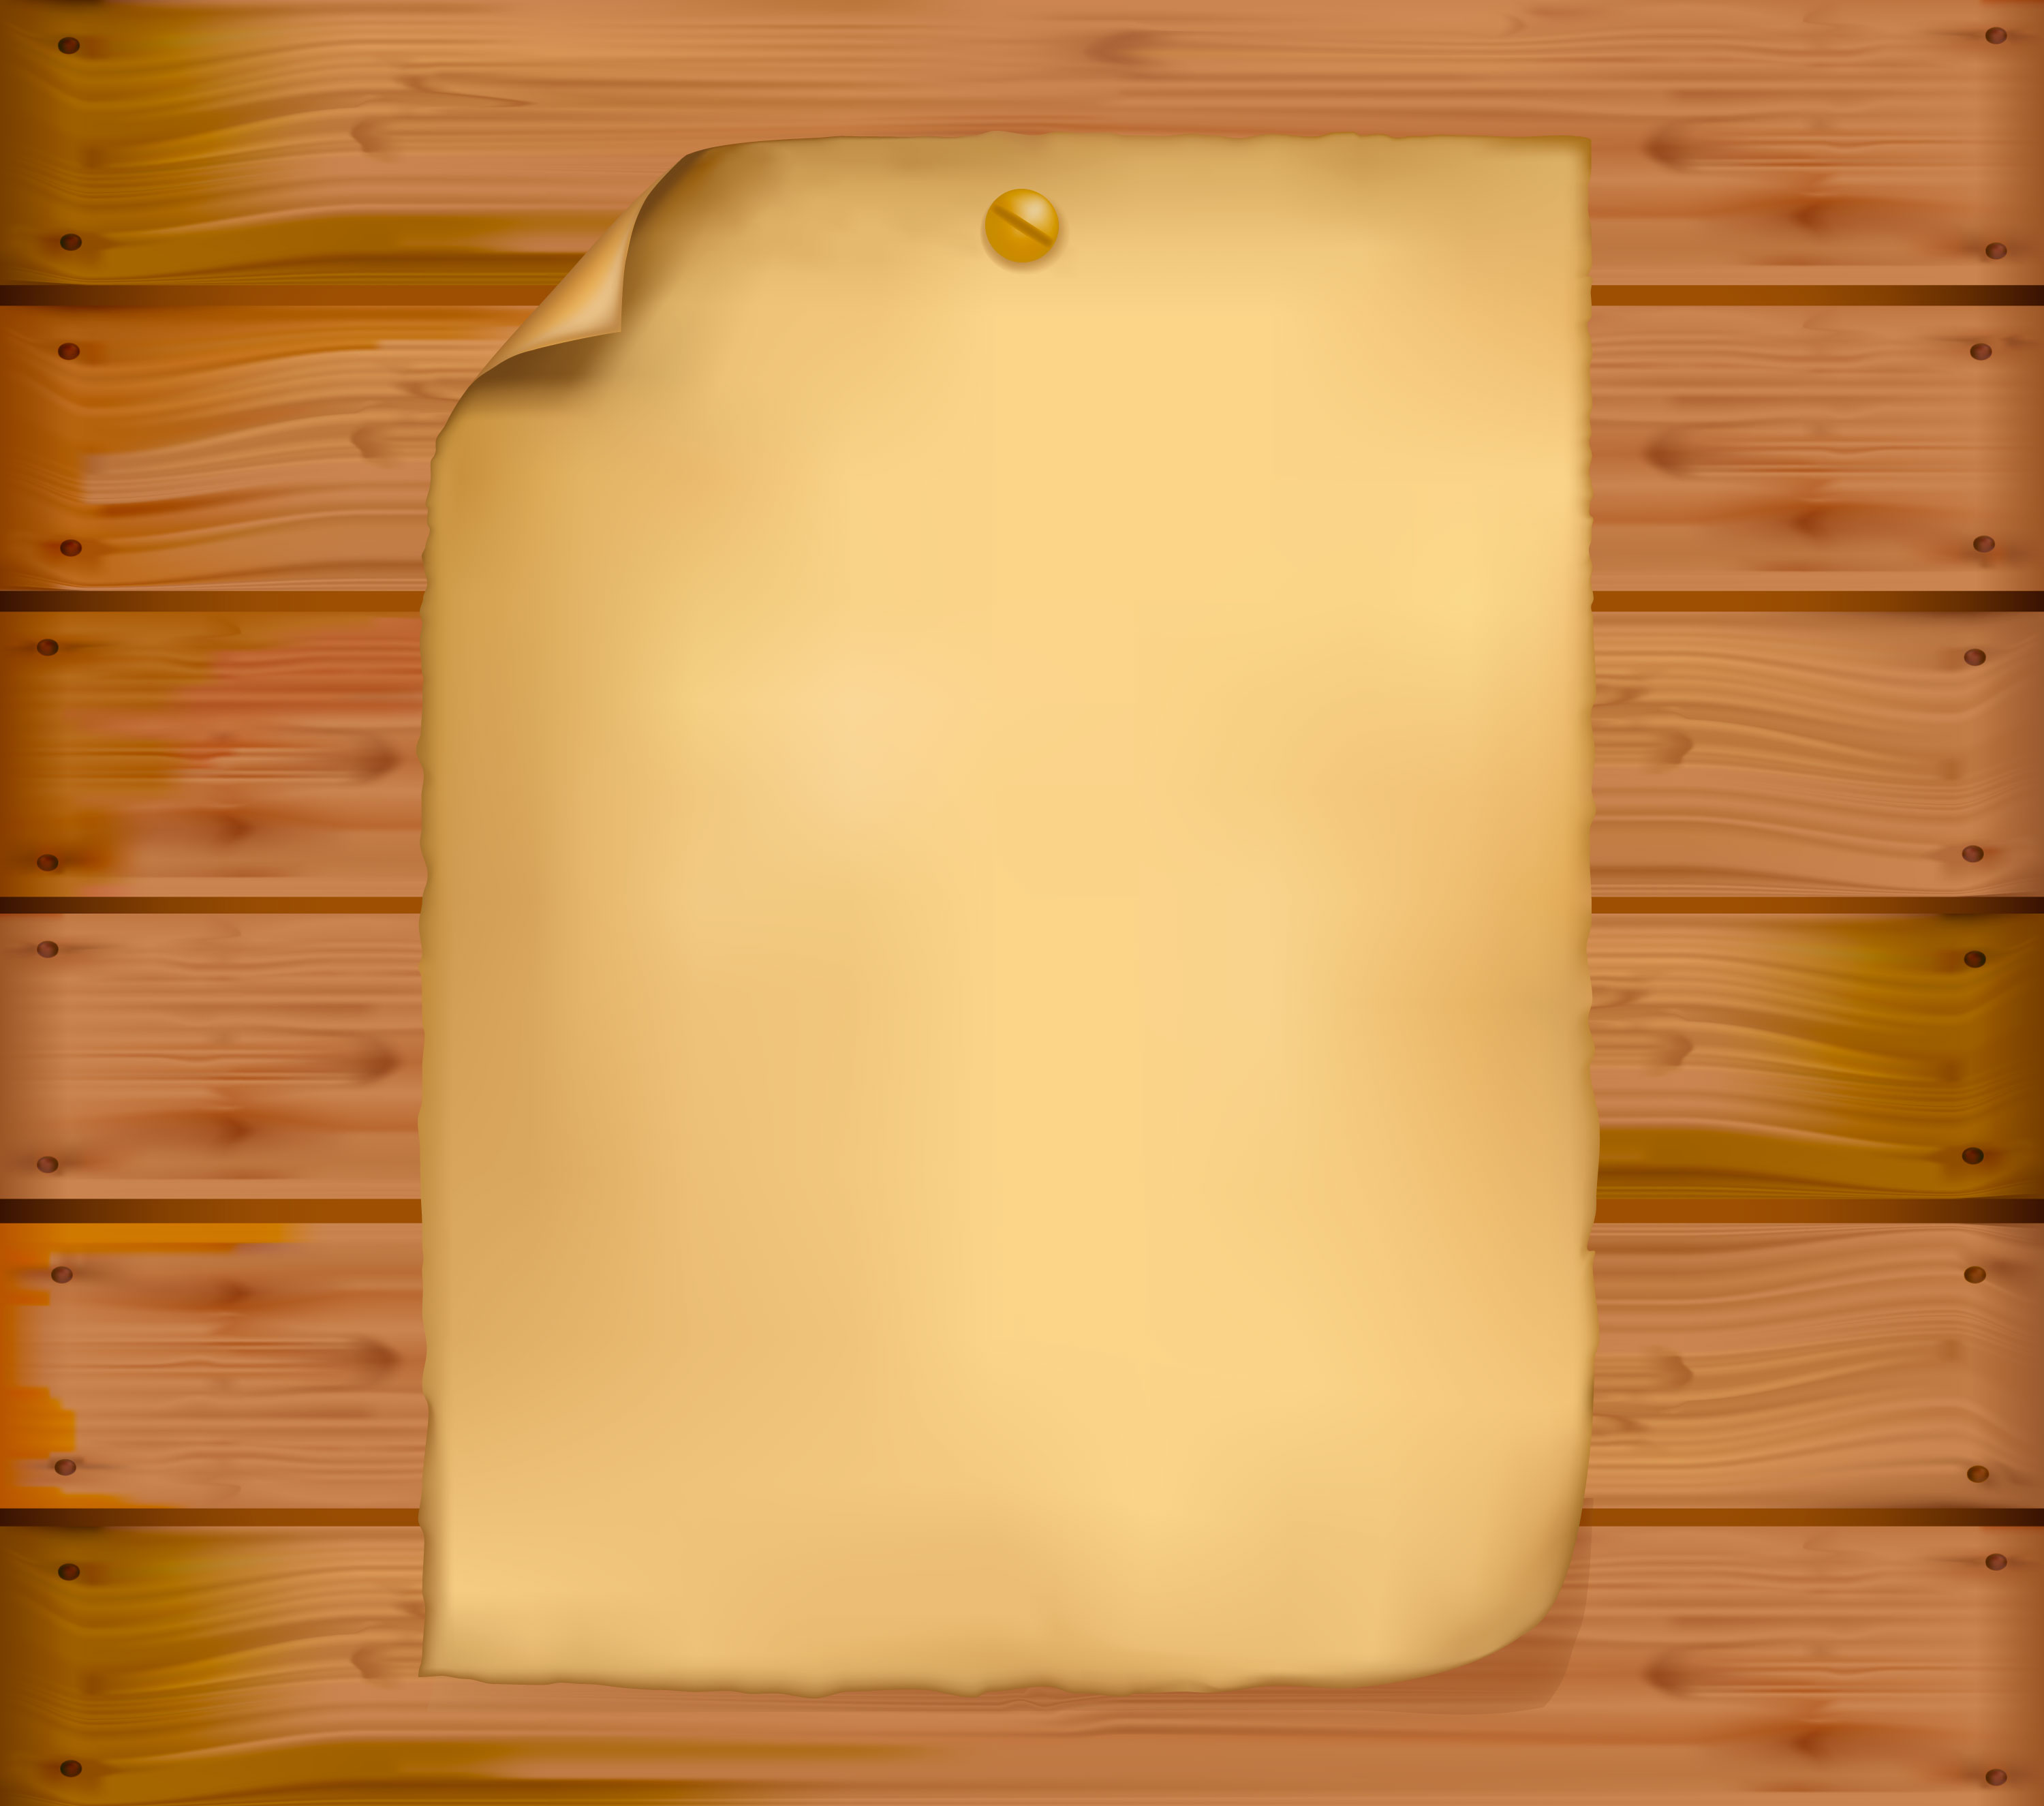 Gallery For Gt Wooden Frame Background